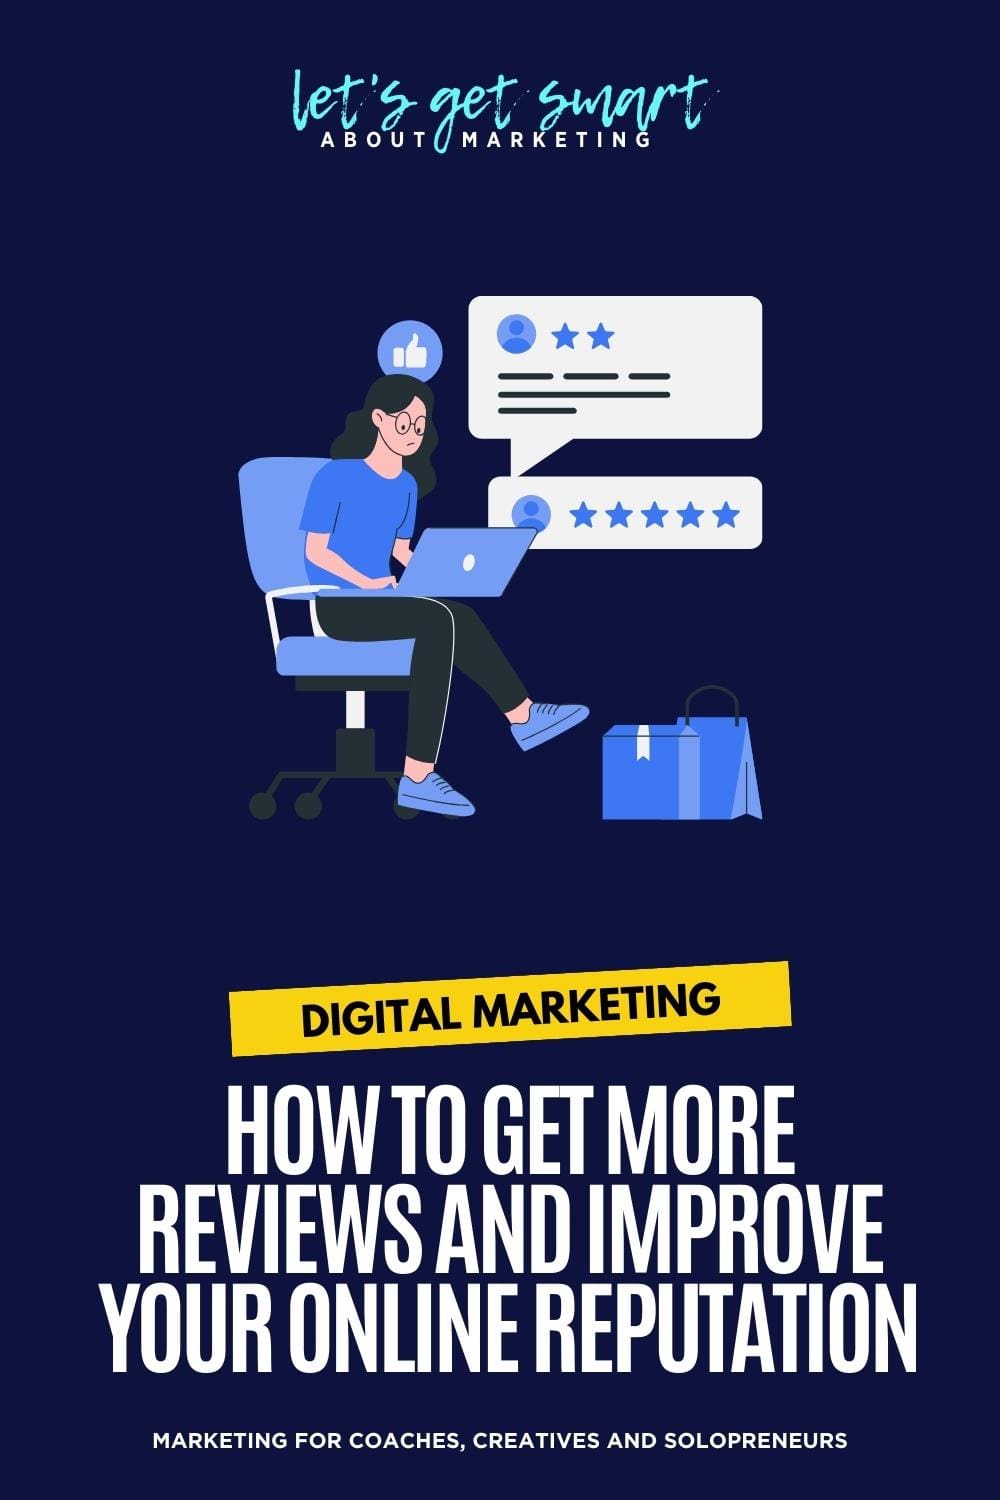 Reviews Matter How to Get More Reviews and Improve Your Online Reputation